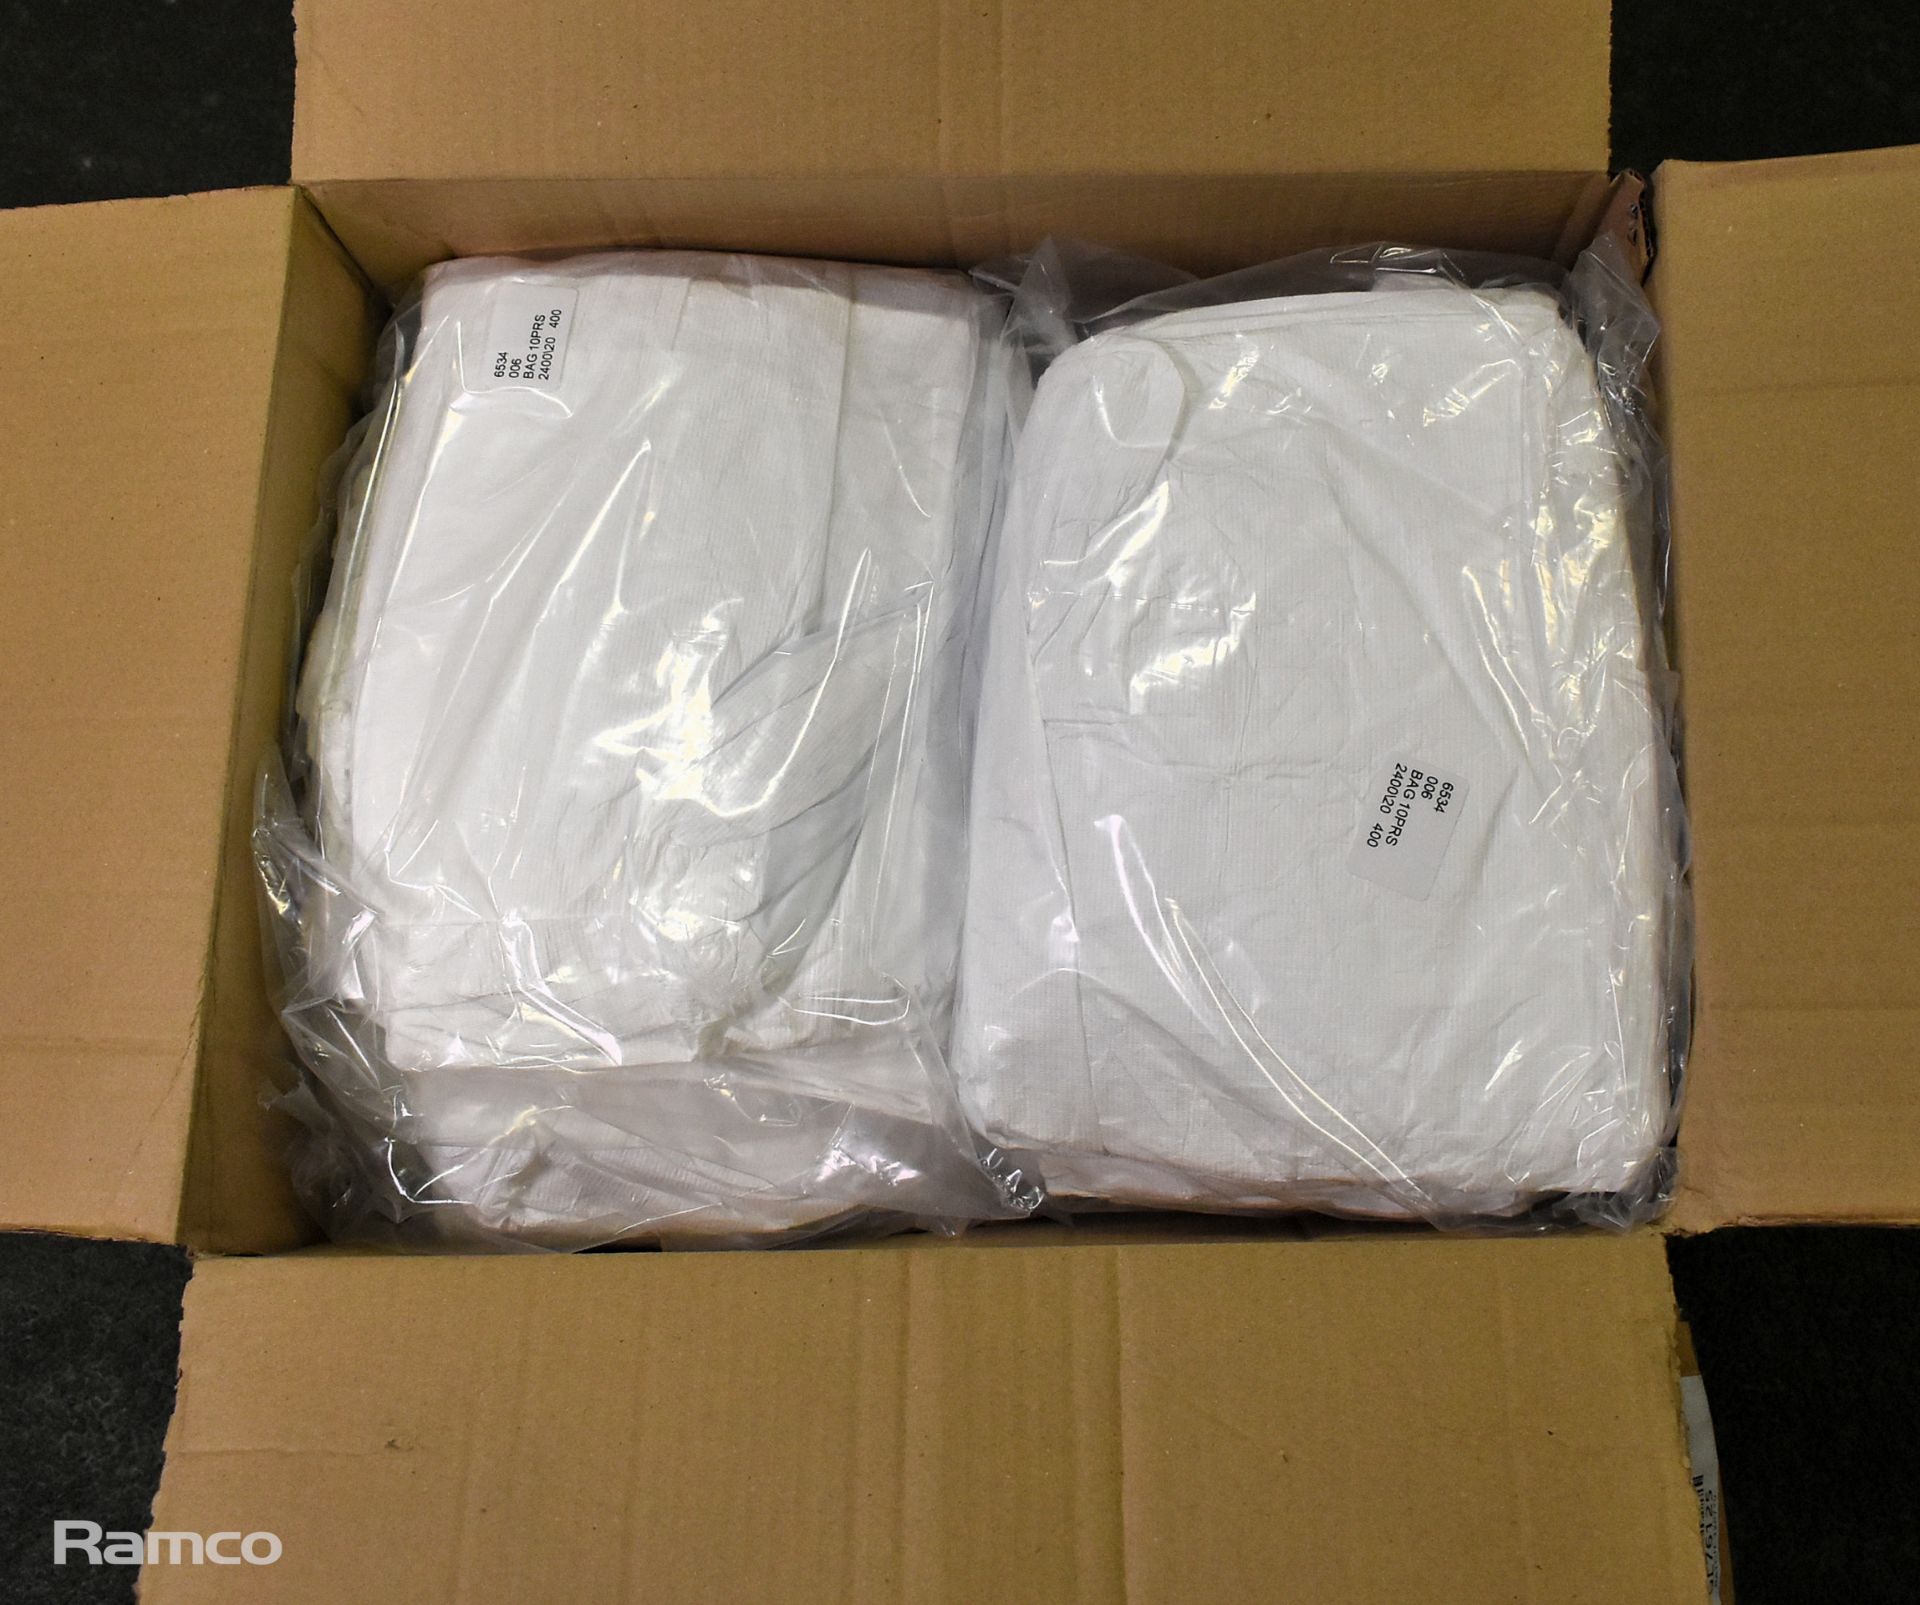 2x boxes of Tyvek overshoes with PVC soles and elasticated ankle 14" - 10 x 10 pairs per box